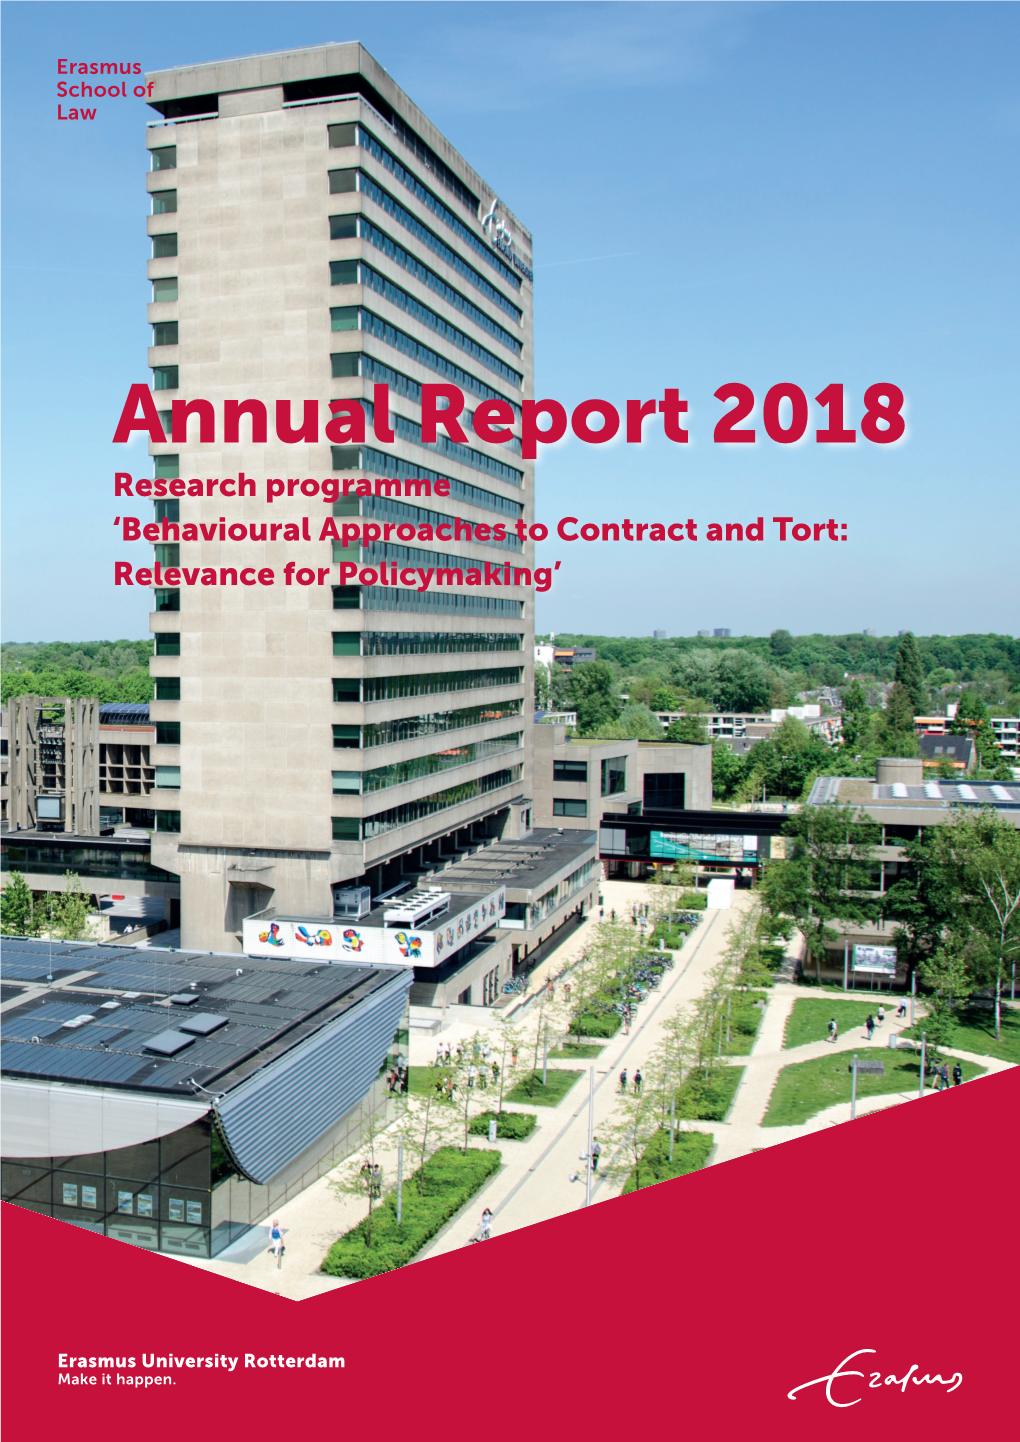 BACT Annual Report 20183.2 MB